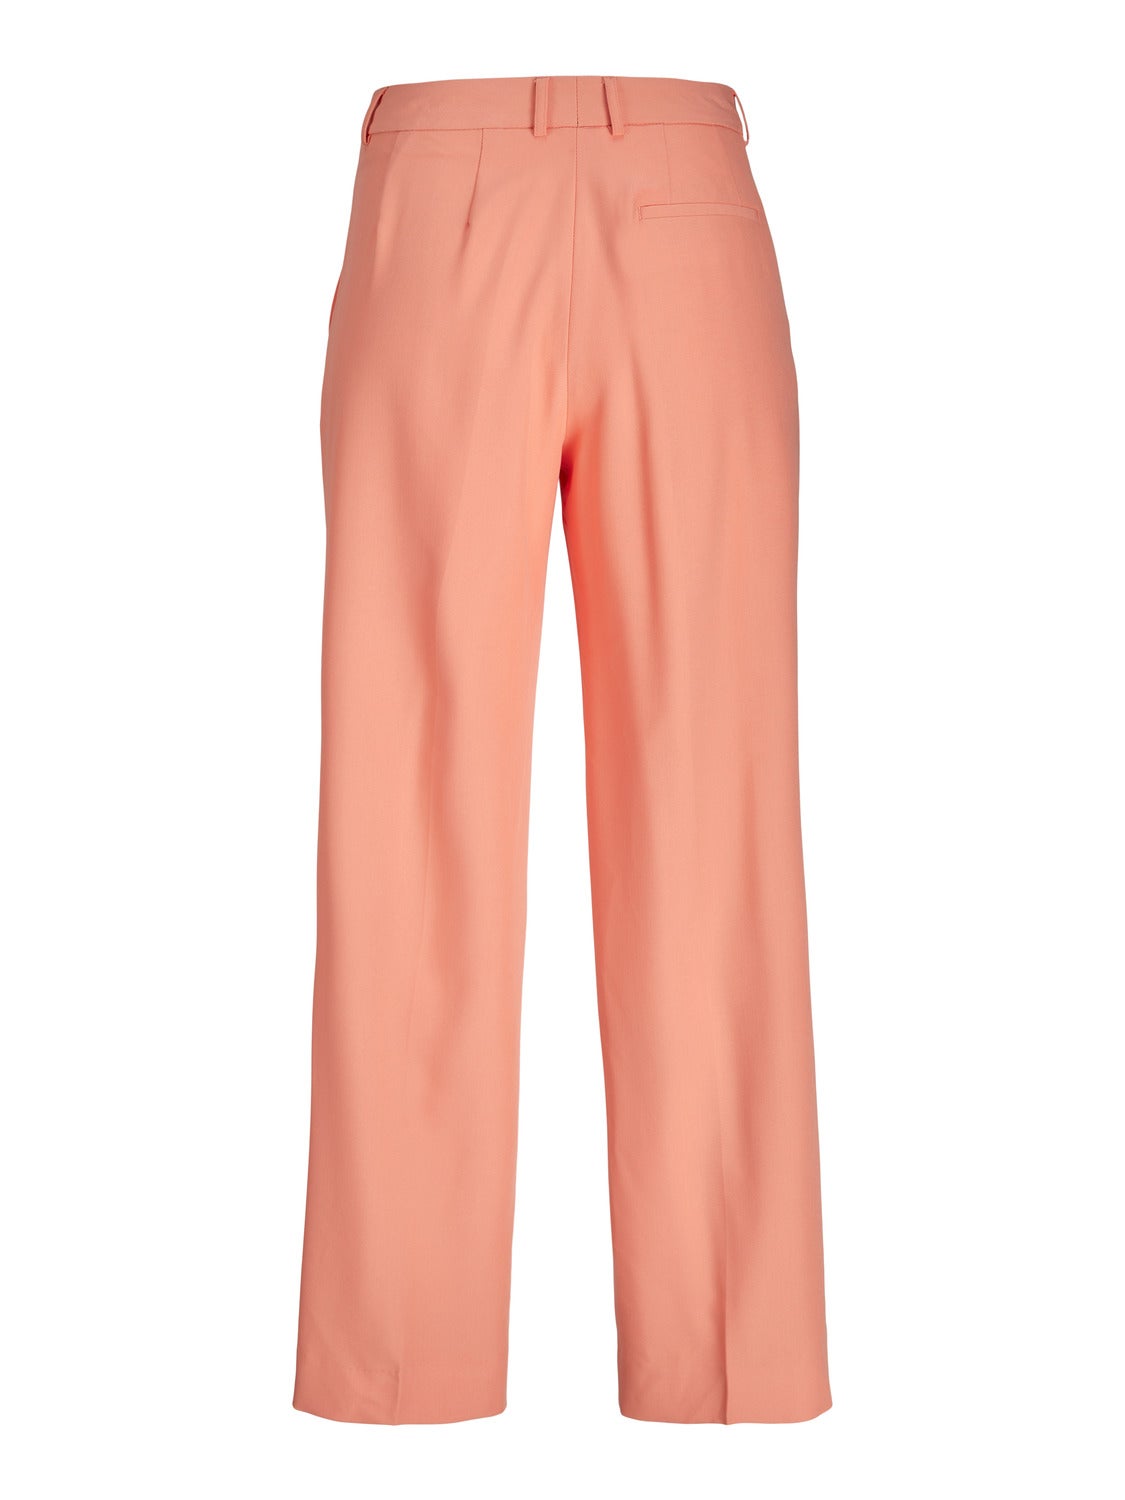 Women Pure Cotton Pant Relaxed Regular Fit Trousers Pants Casual Formal  Solid Trouser Comfort fit (Peach Color Size) - Ro-Sky Fashion - 3488161